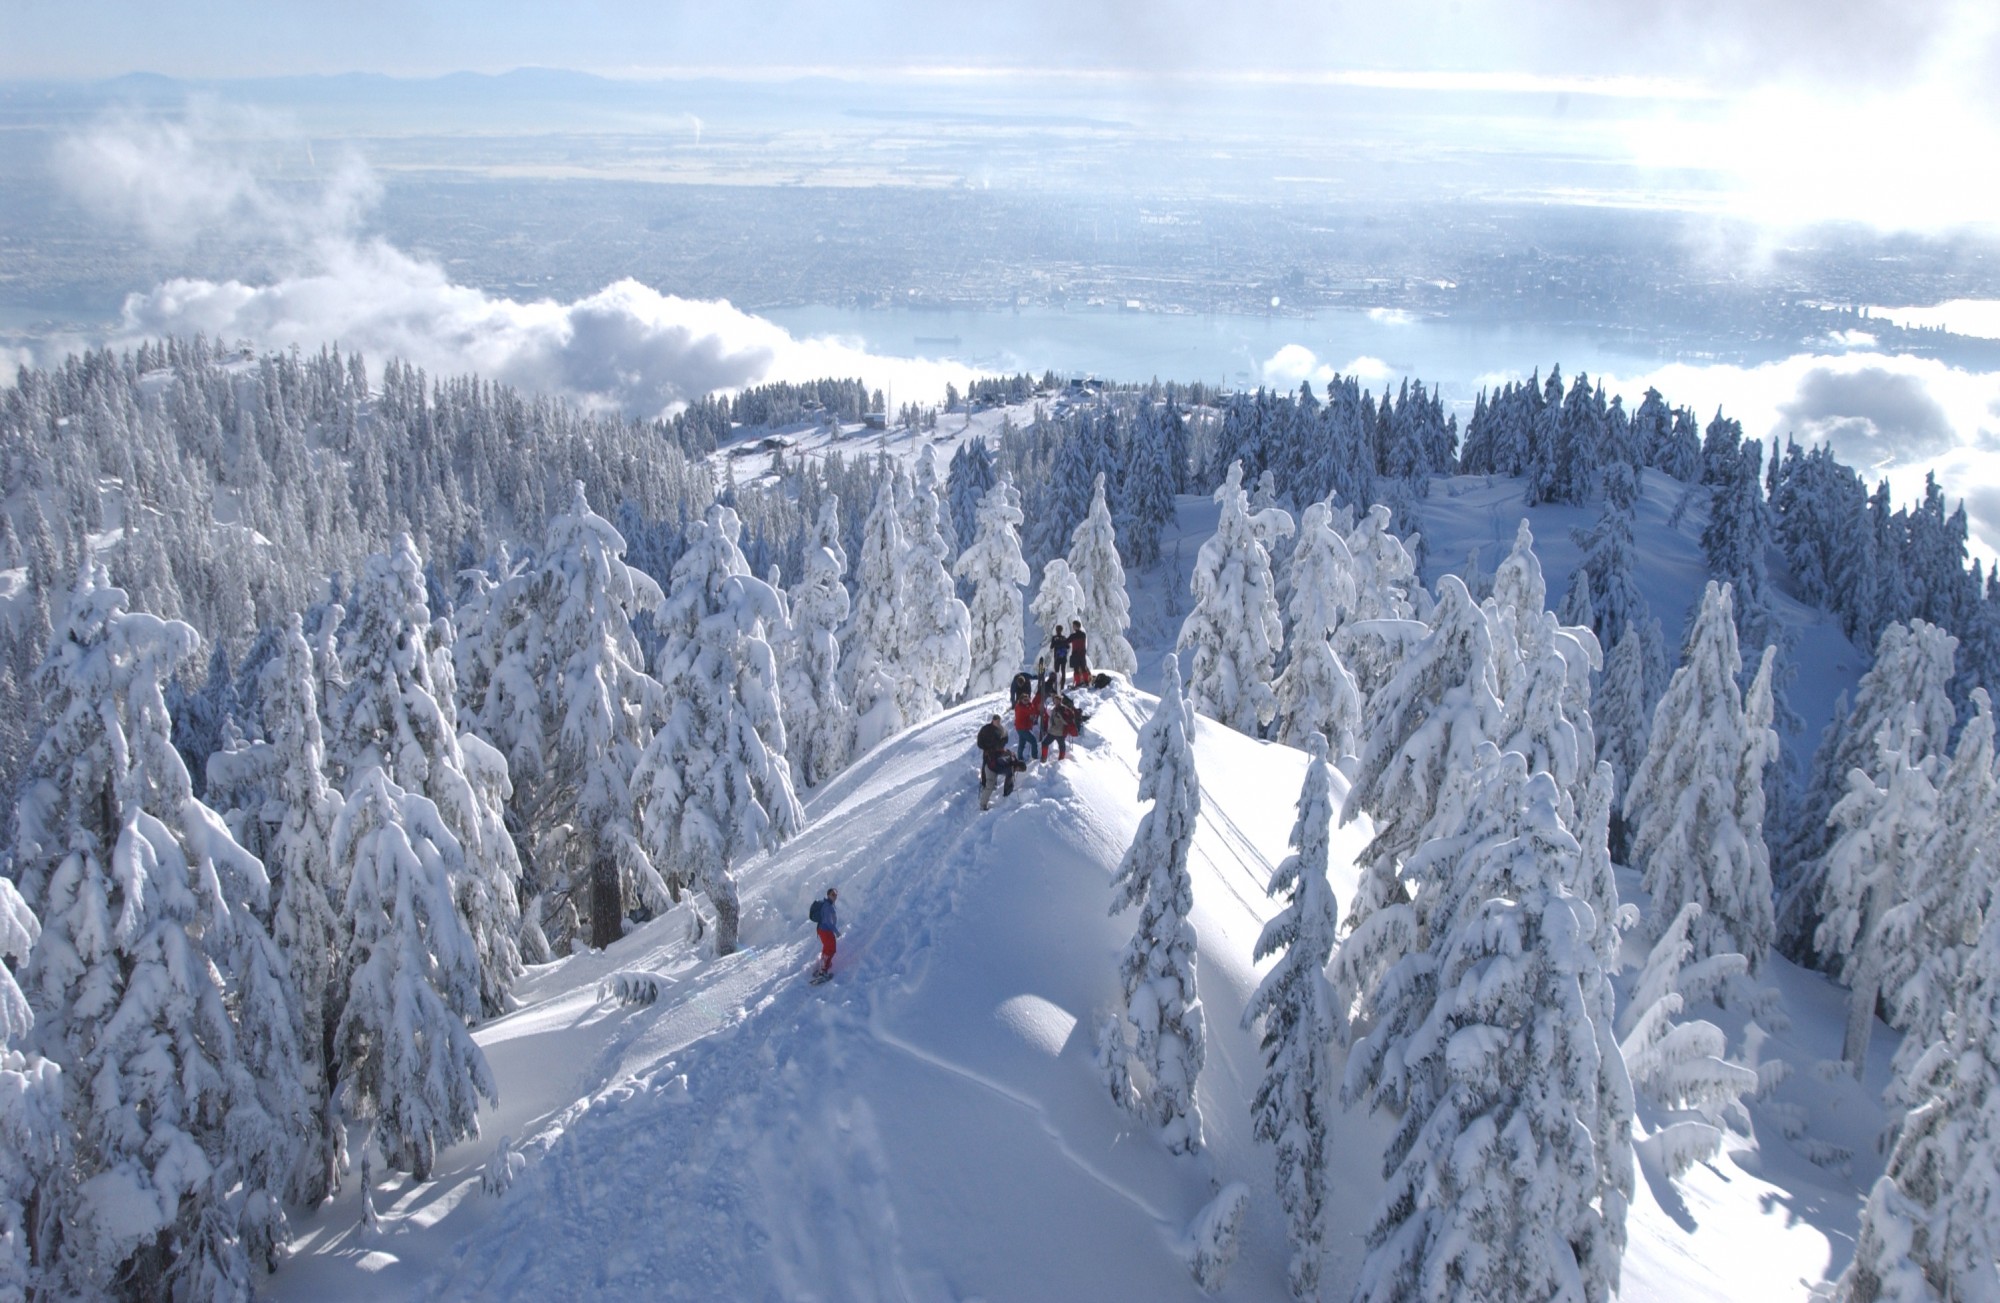 view of Grouse Mountain, BC